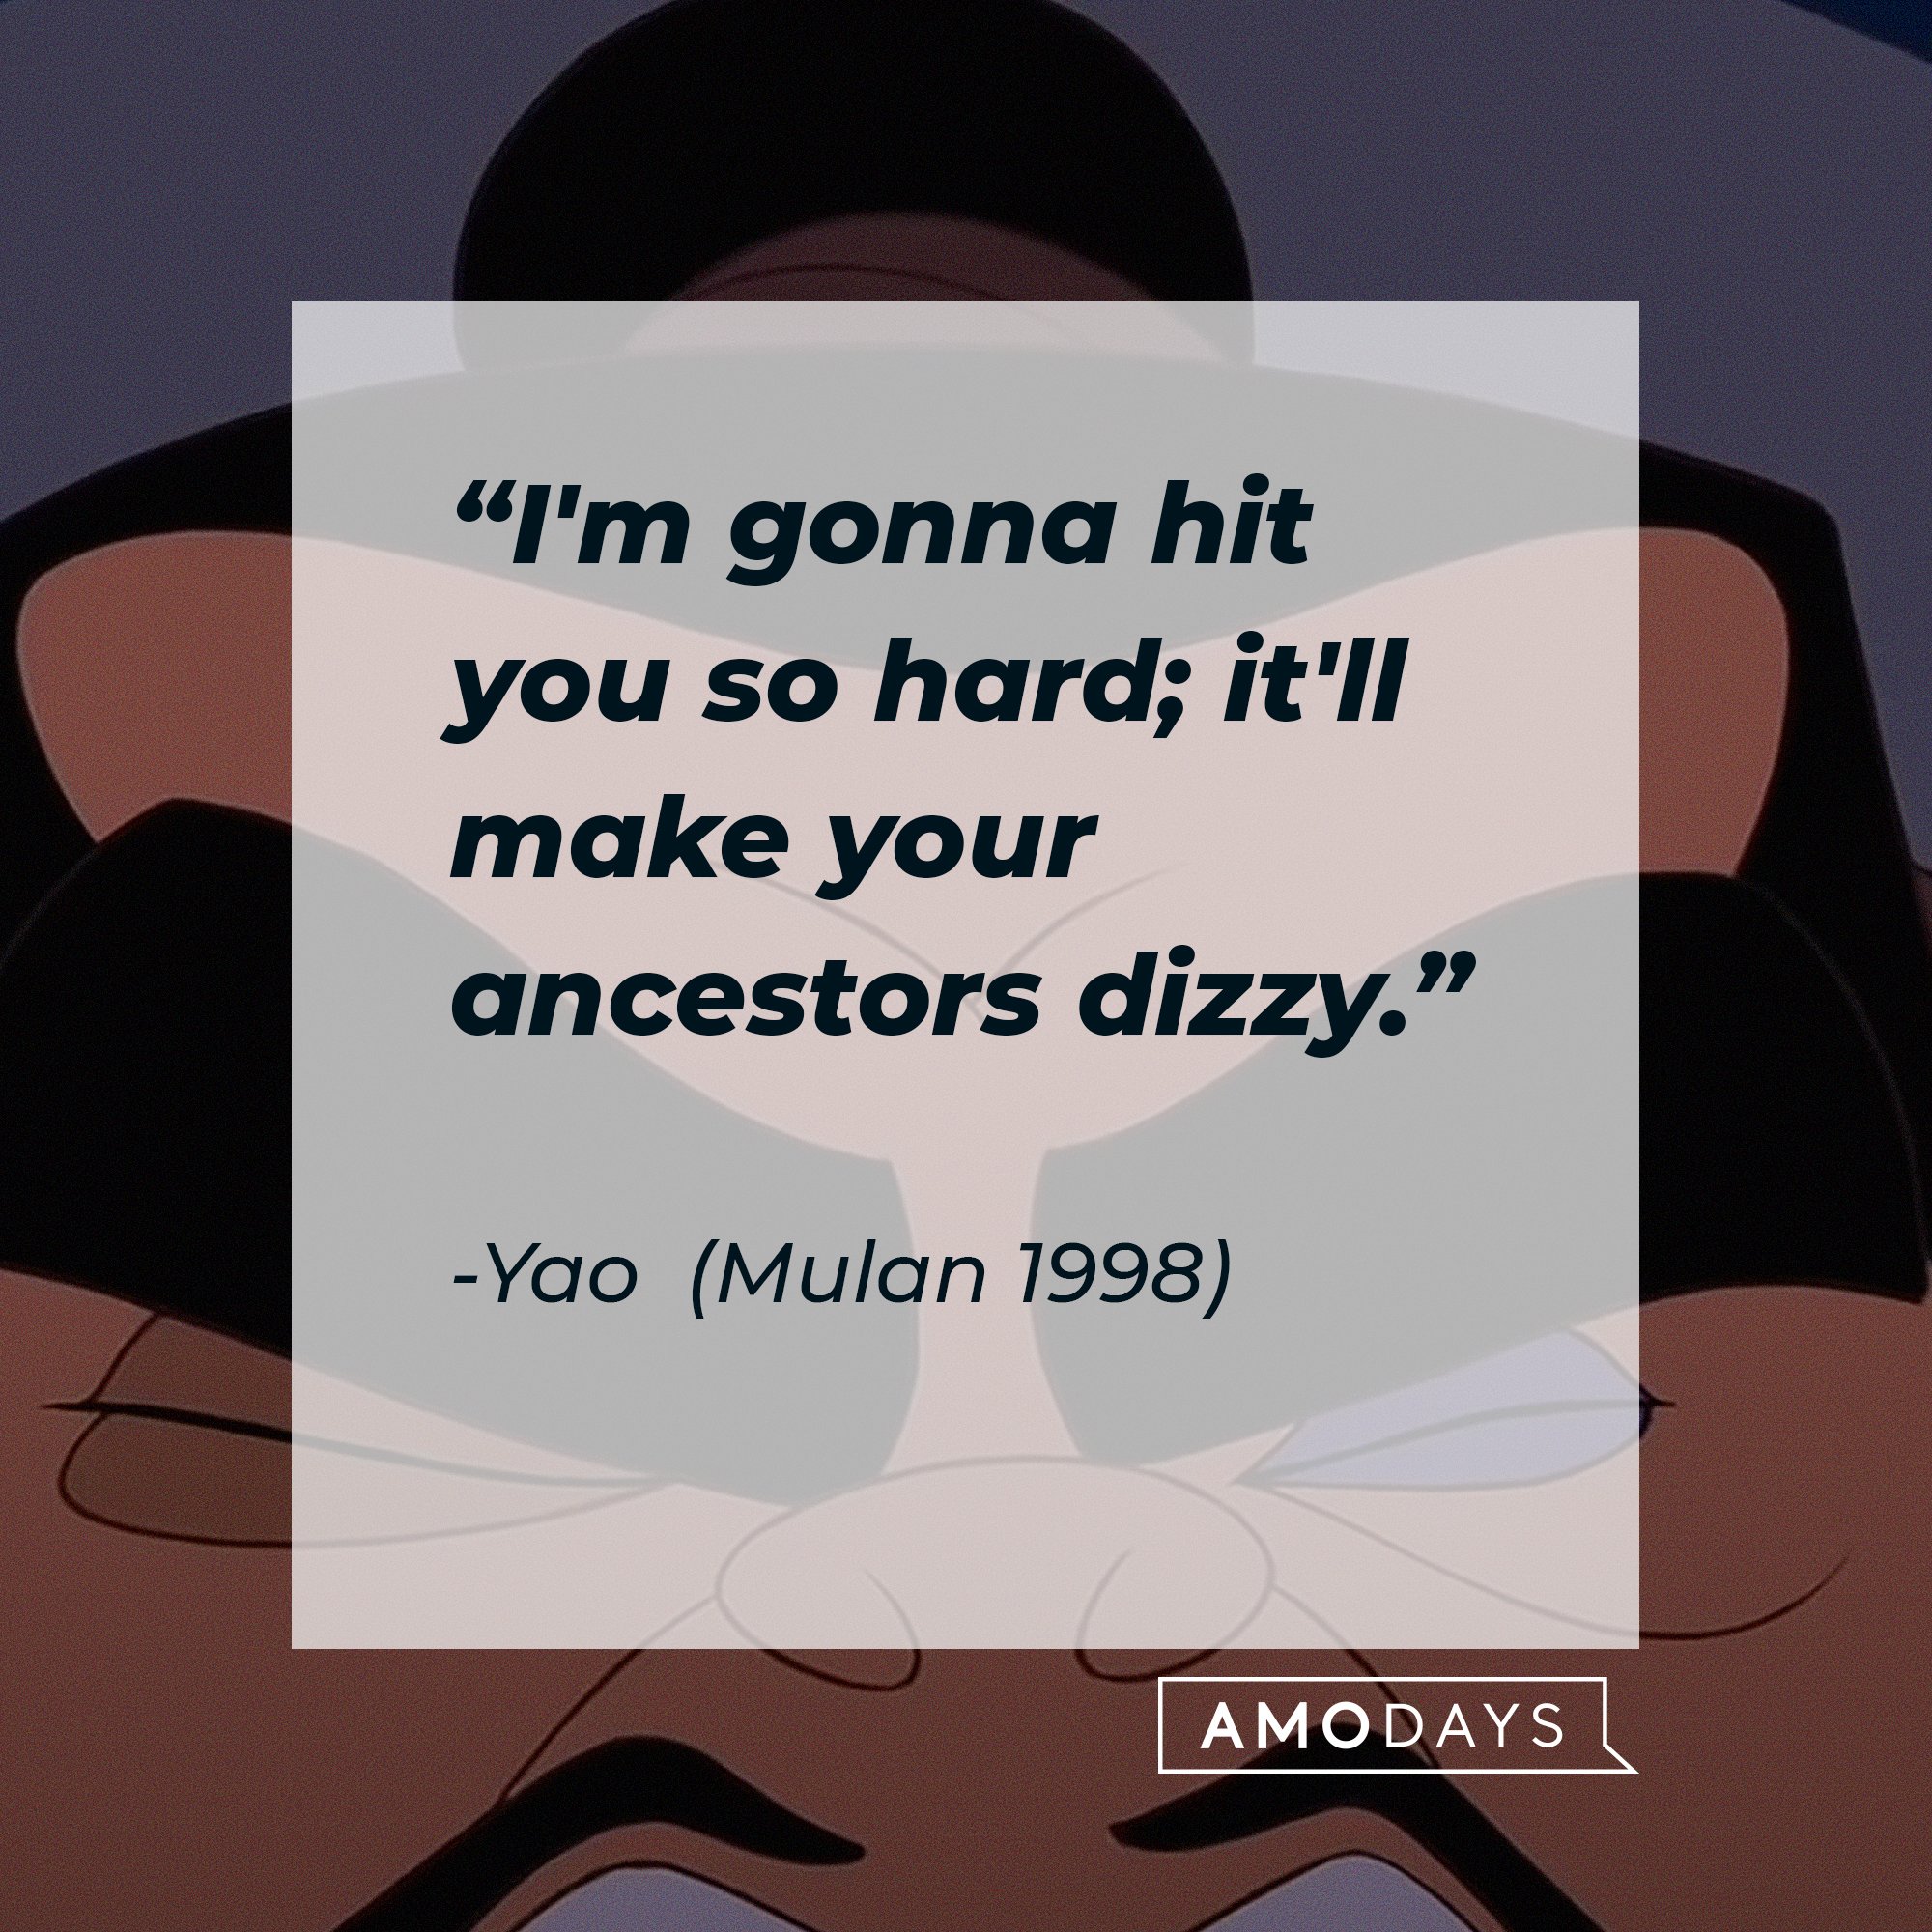  Yao’s quote: "I'm gonna hit you so hard, it'll make your ancestors dizzy." | Image: AmoDays